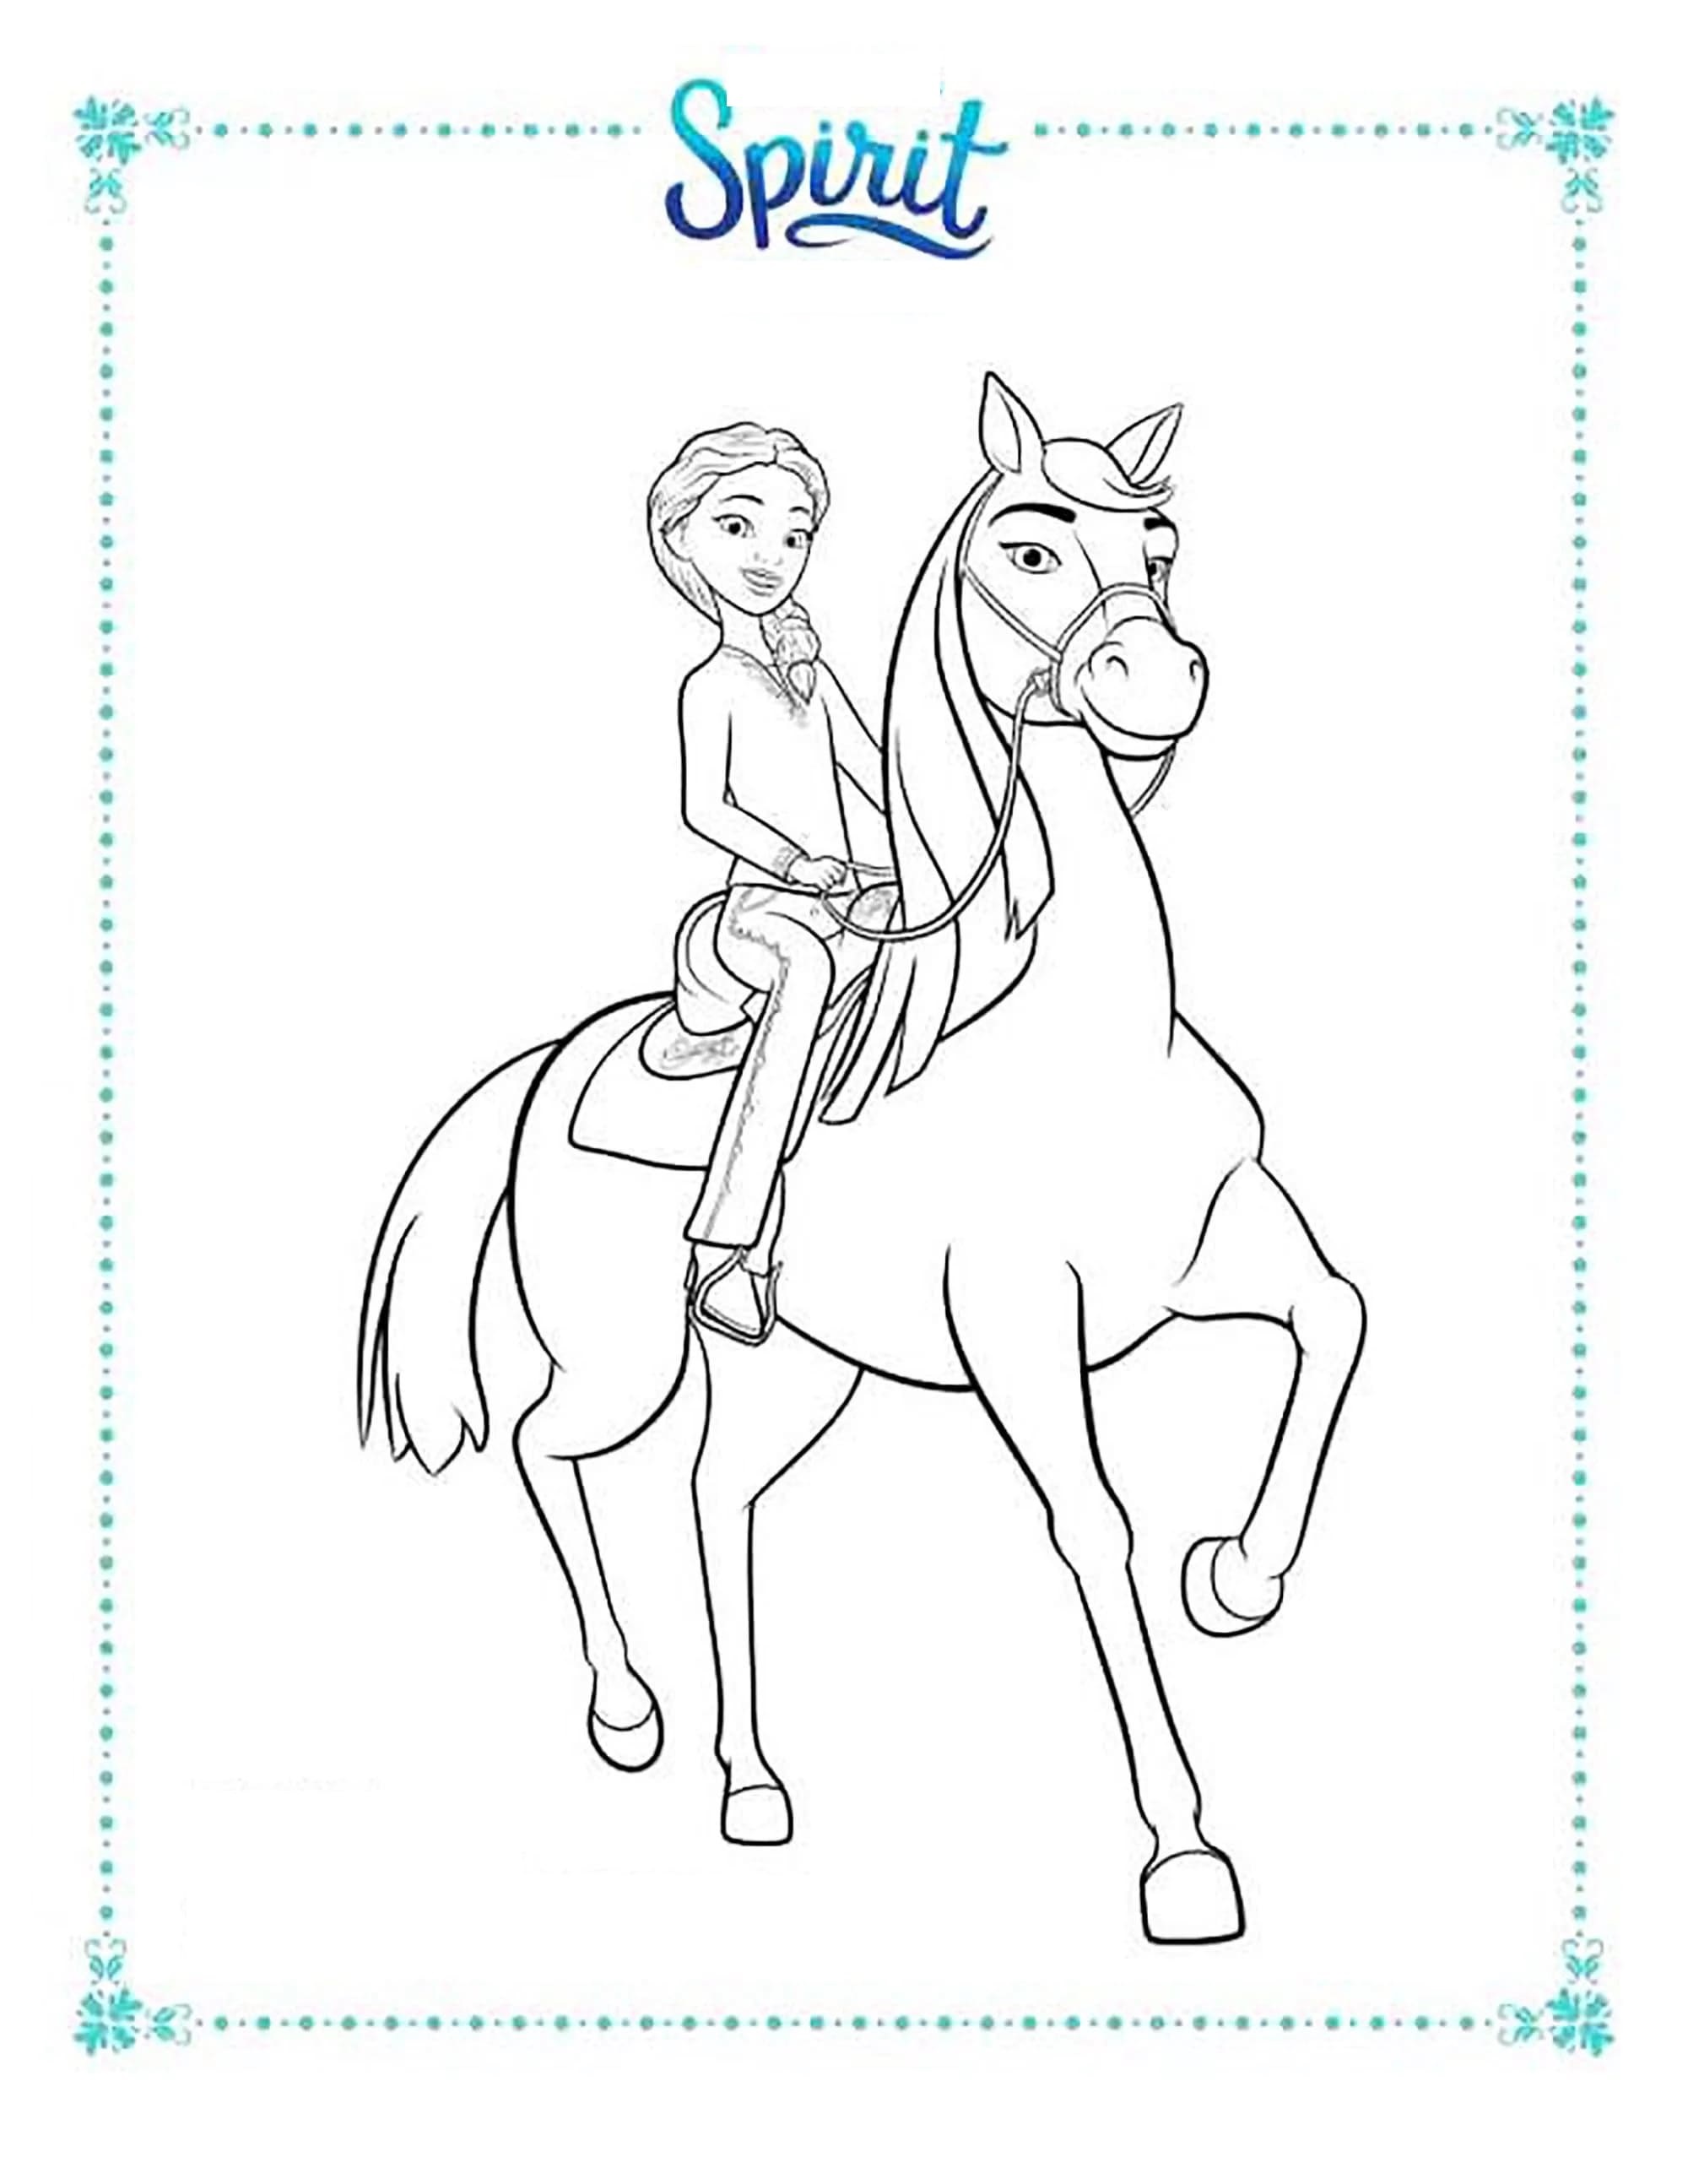 spirit-riding-free-coloring-pages-40-new-images-free-printable